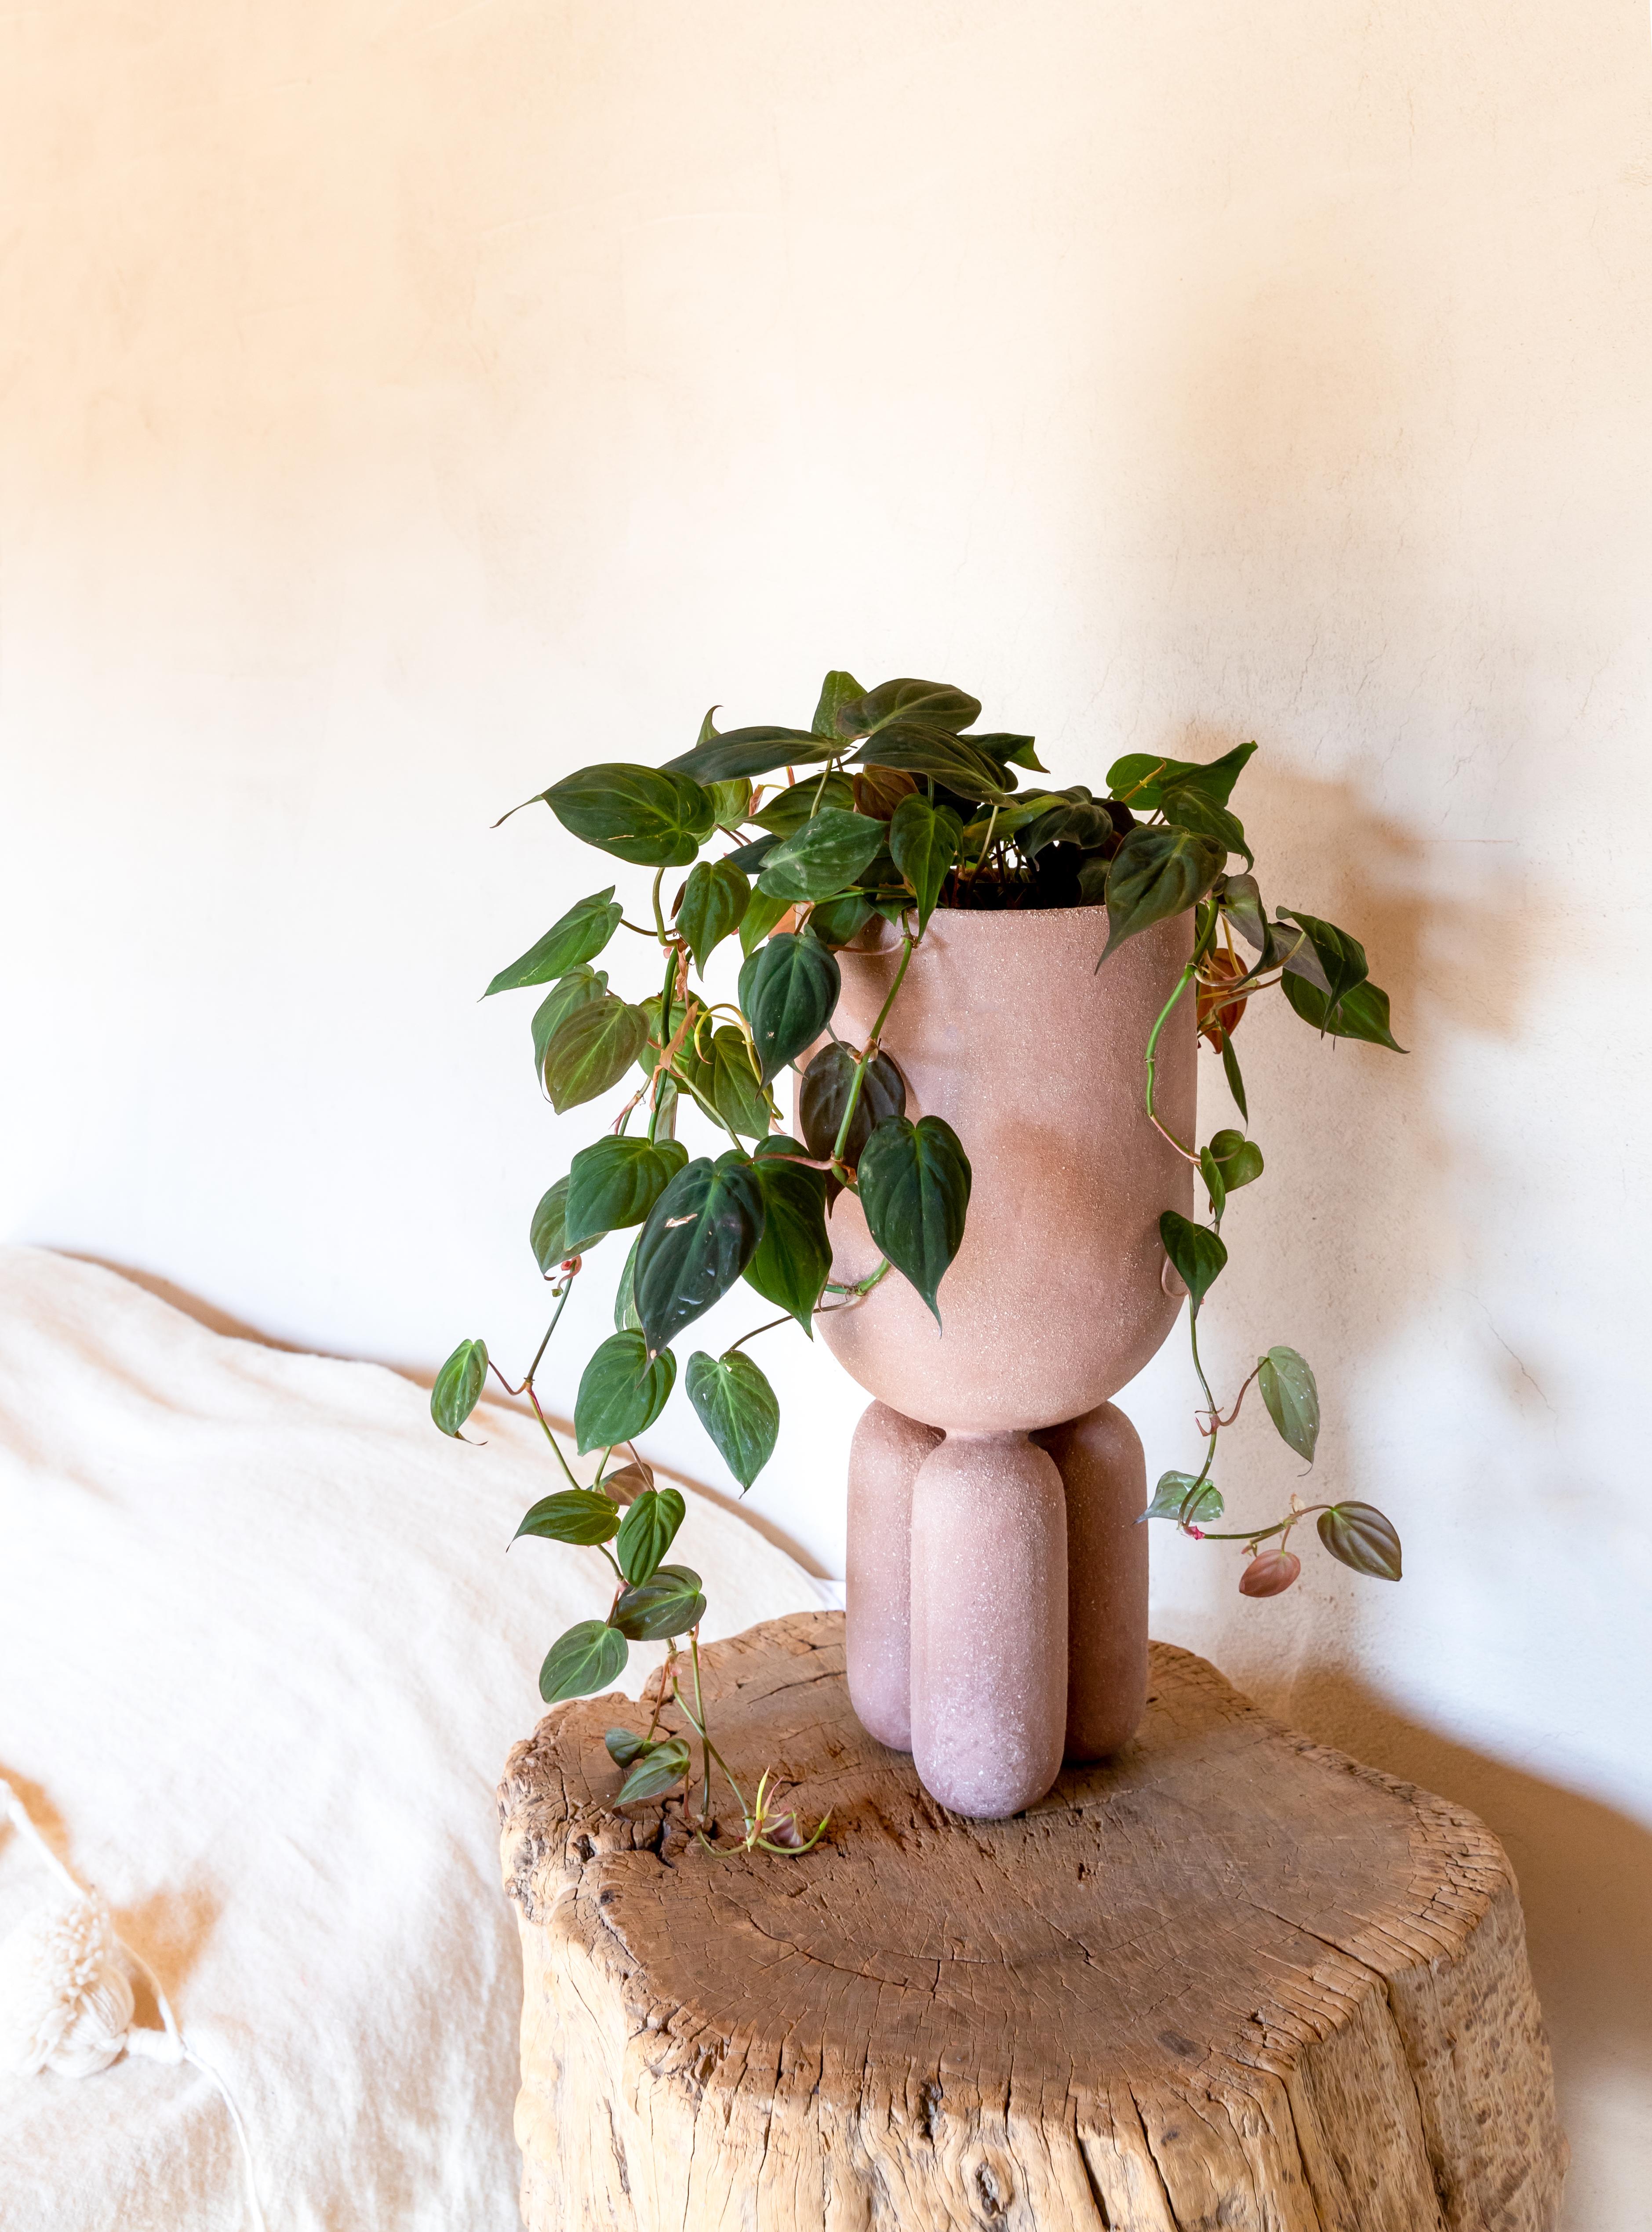 Planter clay vase by Lisa Allegra
Dimensions: ø 19 x 5 x 44 cm
Materials: Clay
Variations available.

Born in 1986 in Paris, Lisa Allegra has earned in 2010 a degree in furniture design from the École Supérieure des Arts Décoratifs. She has